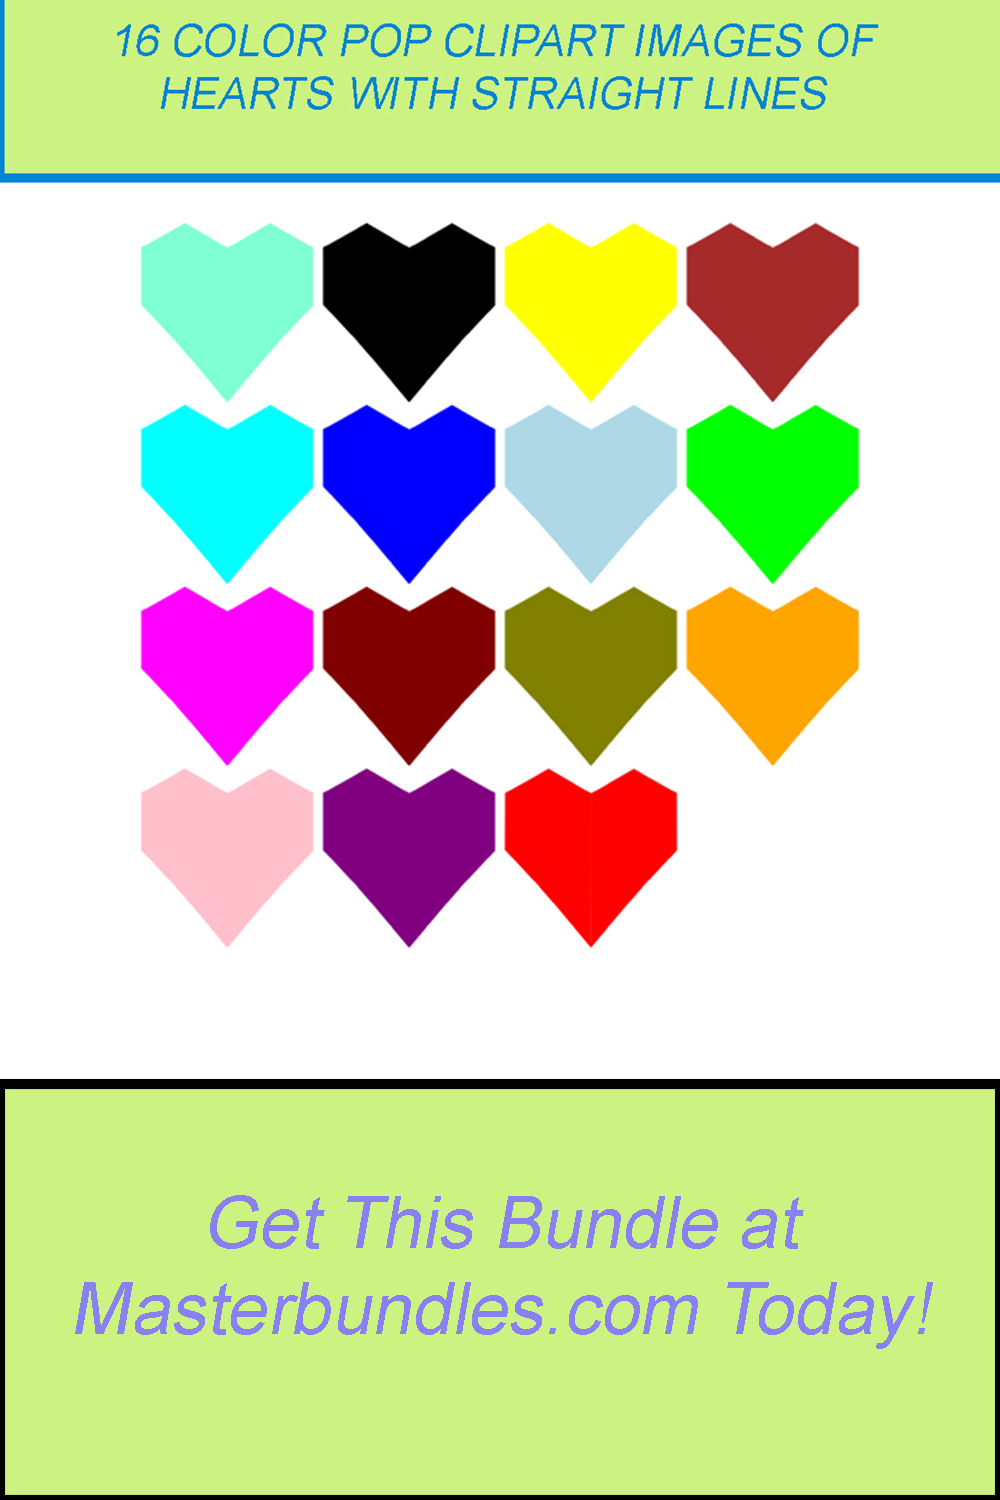 16 COLOR POP CLIPART IMAGES OF HEART STRAIGHT LINES 3 pinterest preview image.